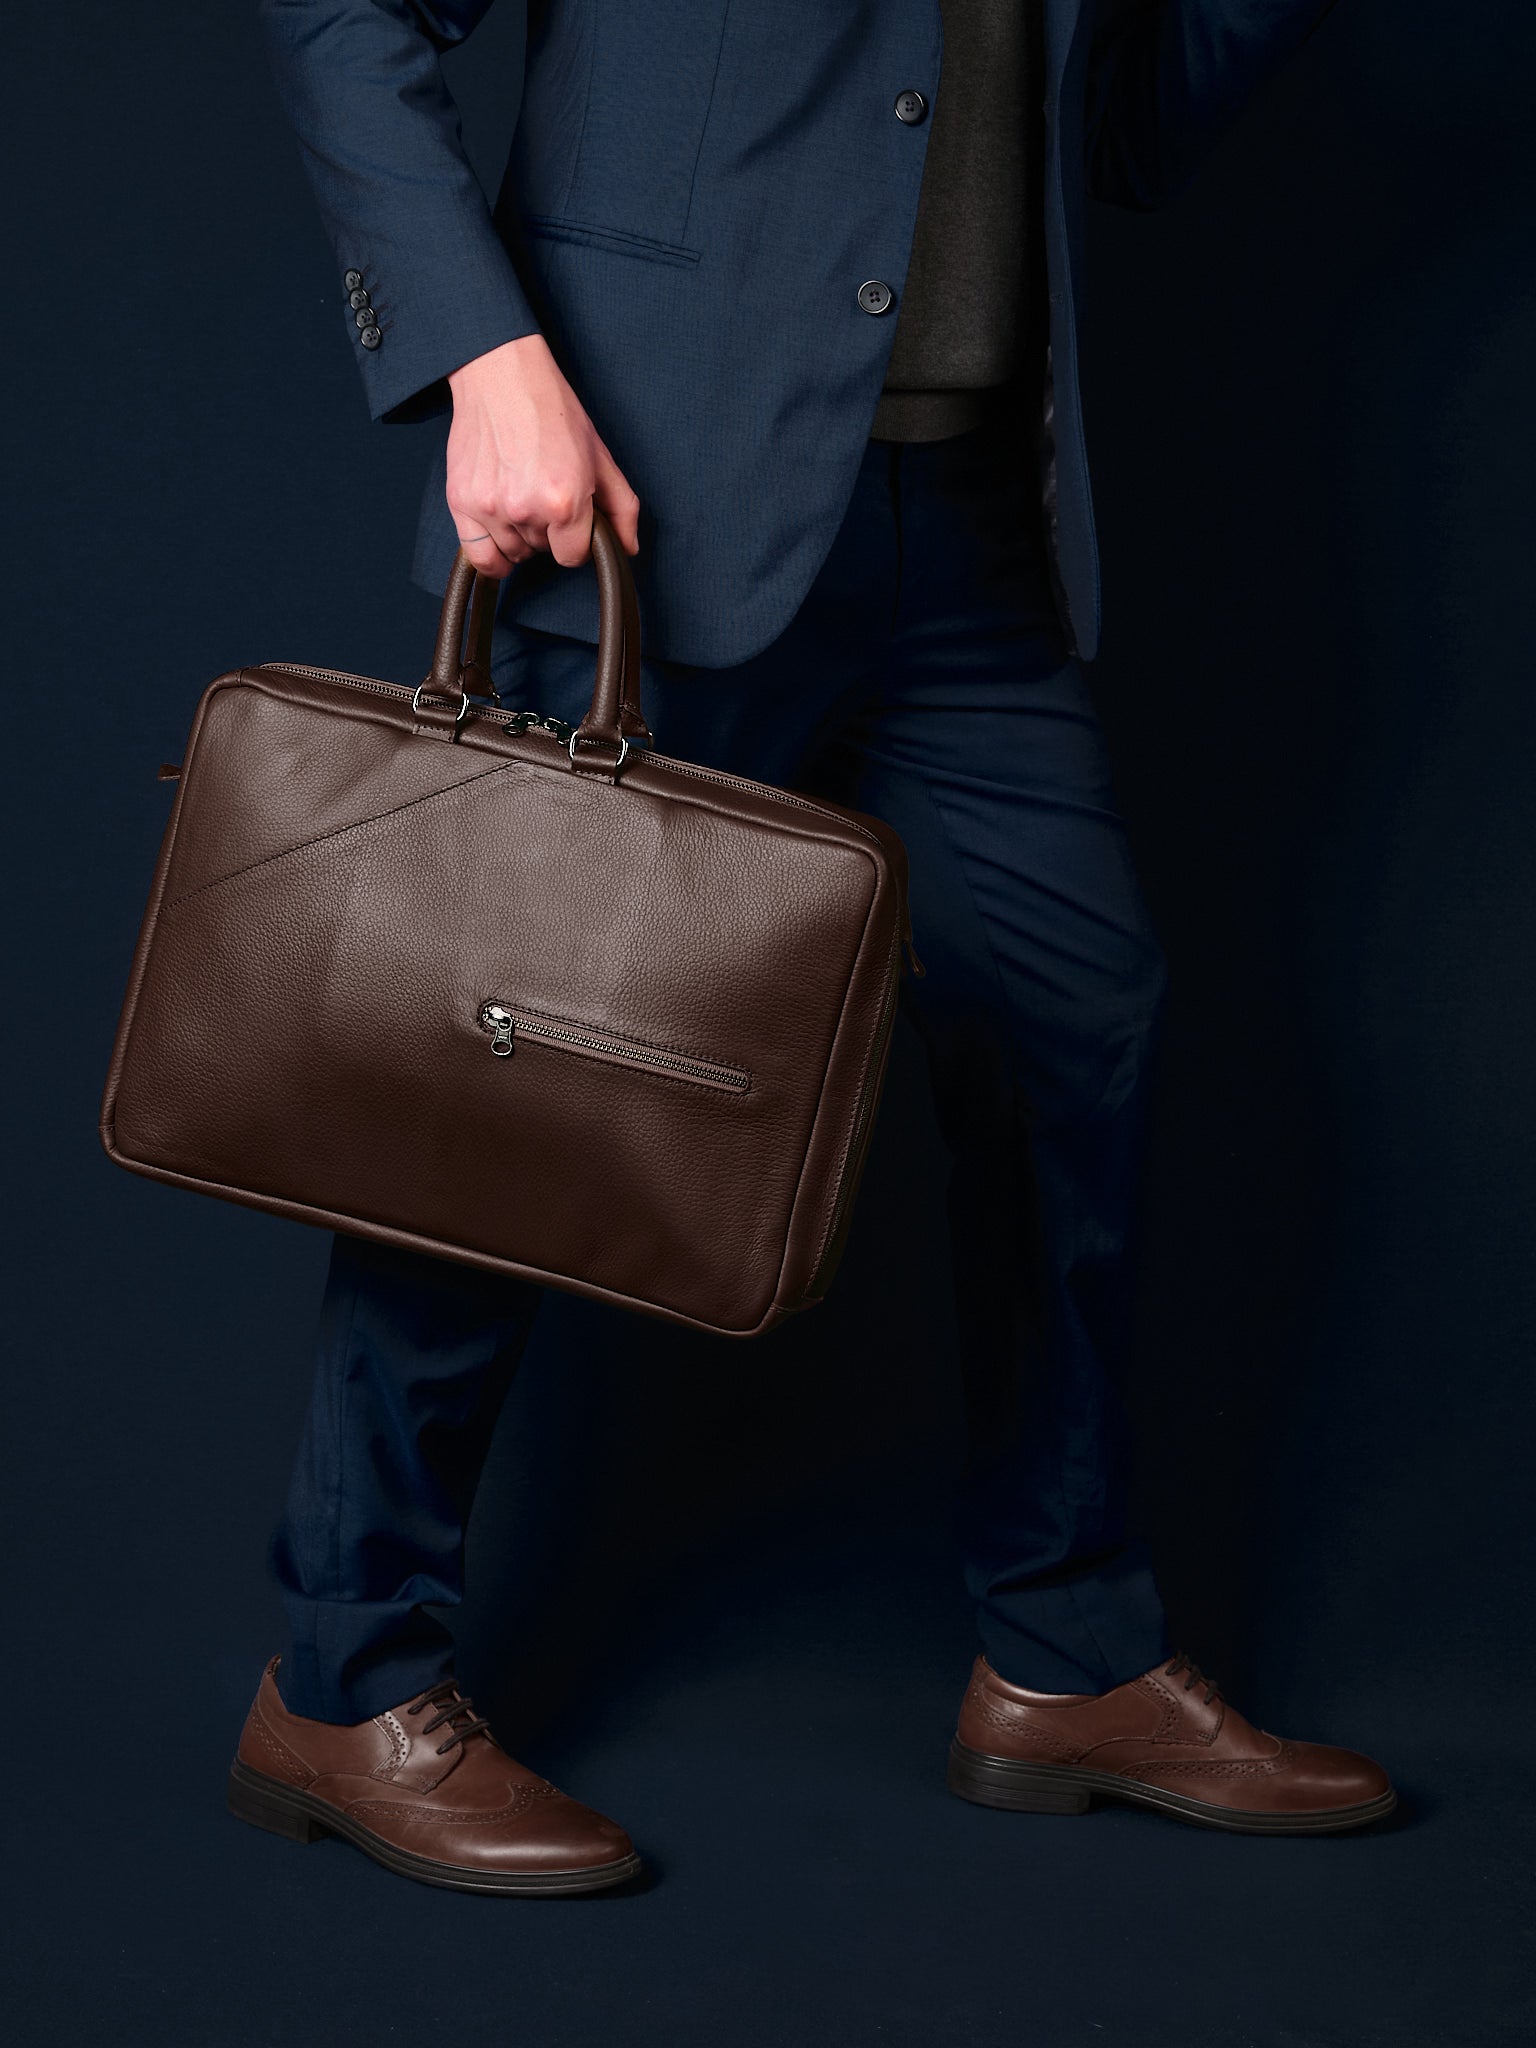 Professional Backpack for Work. Best Convertible Backpack Briefcase Dark Brown by Capra Leather